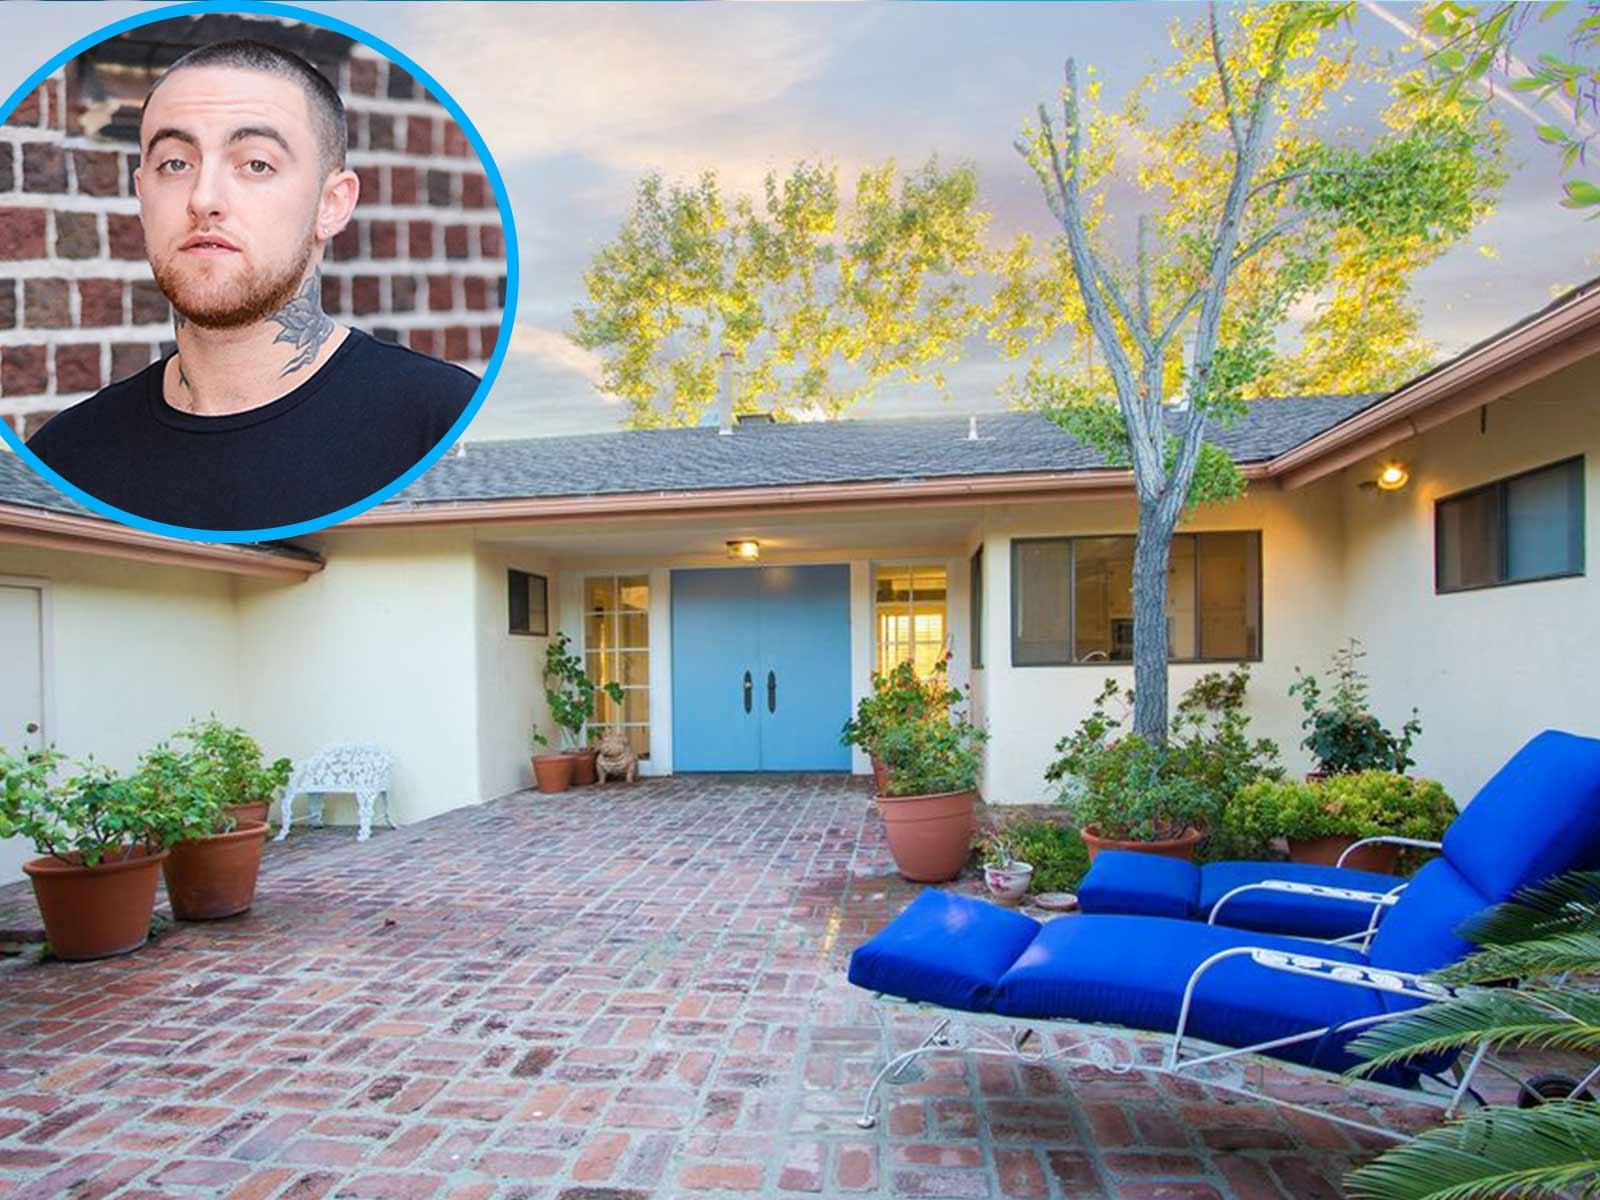 Mac Miller’s Death House Back on the Market with Increased Rent